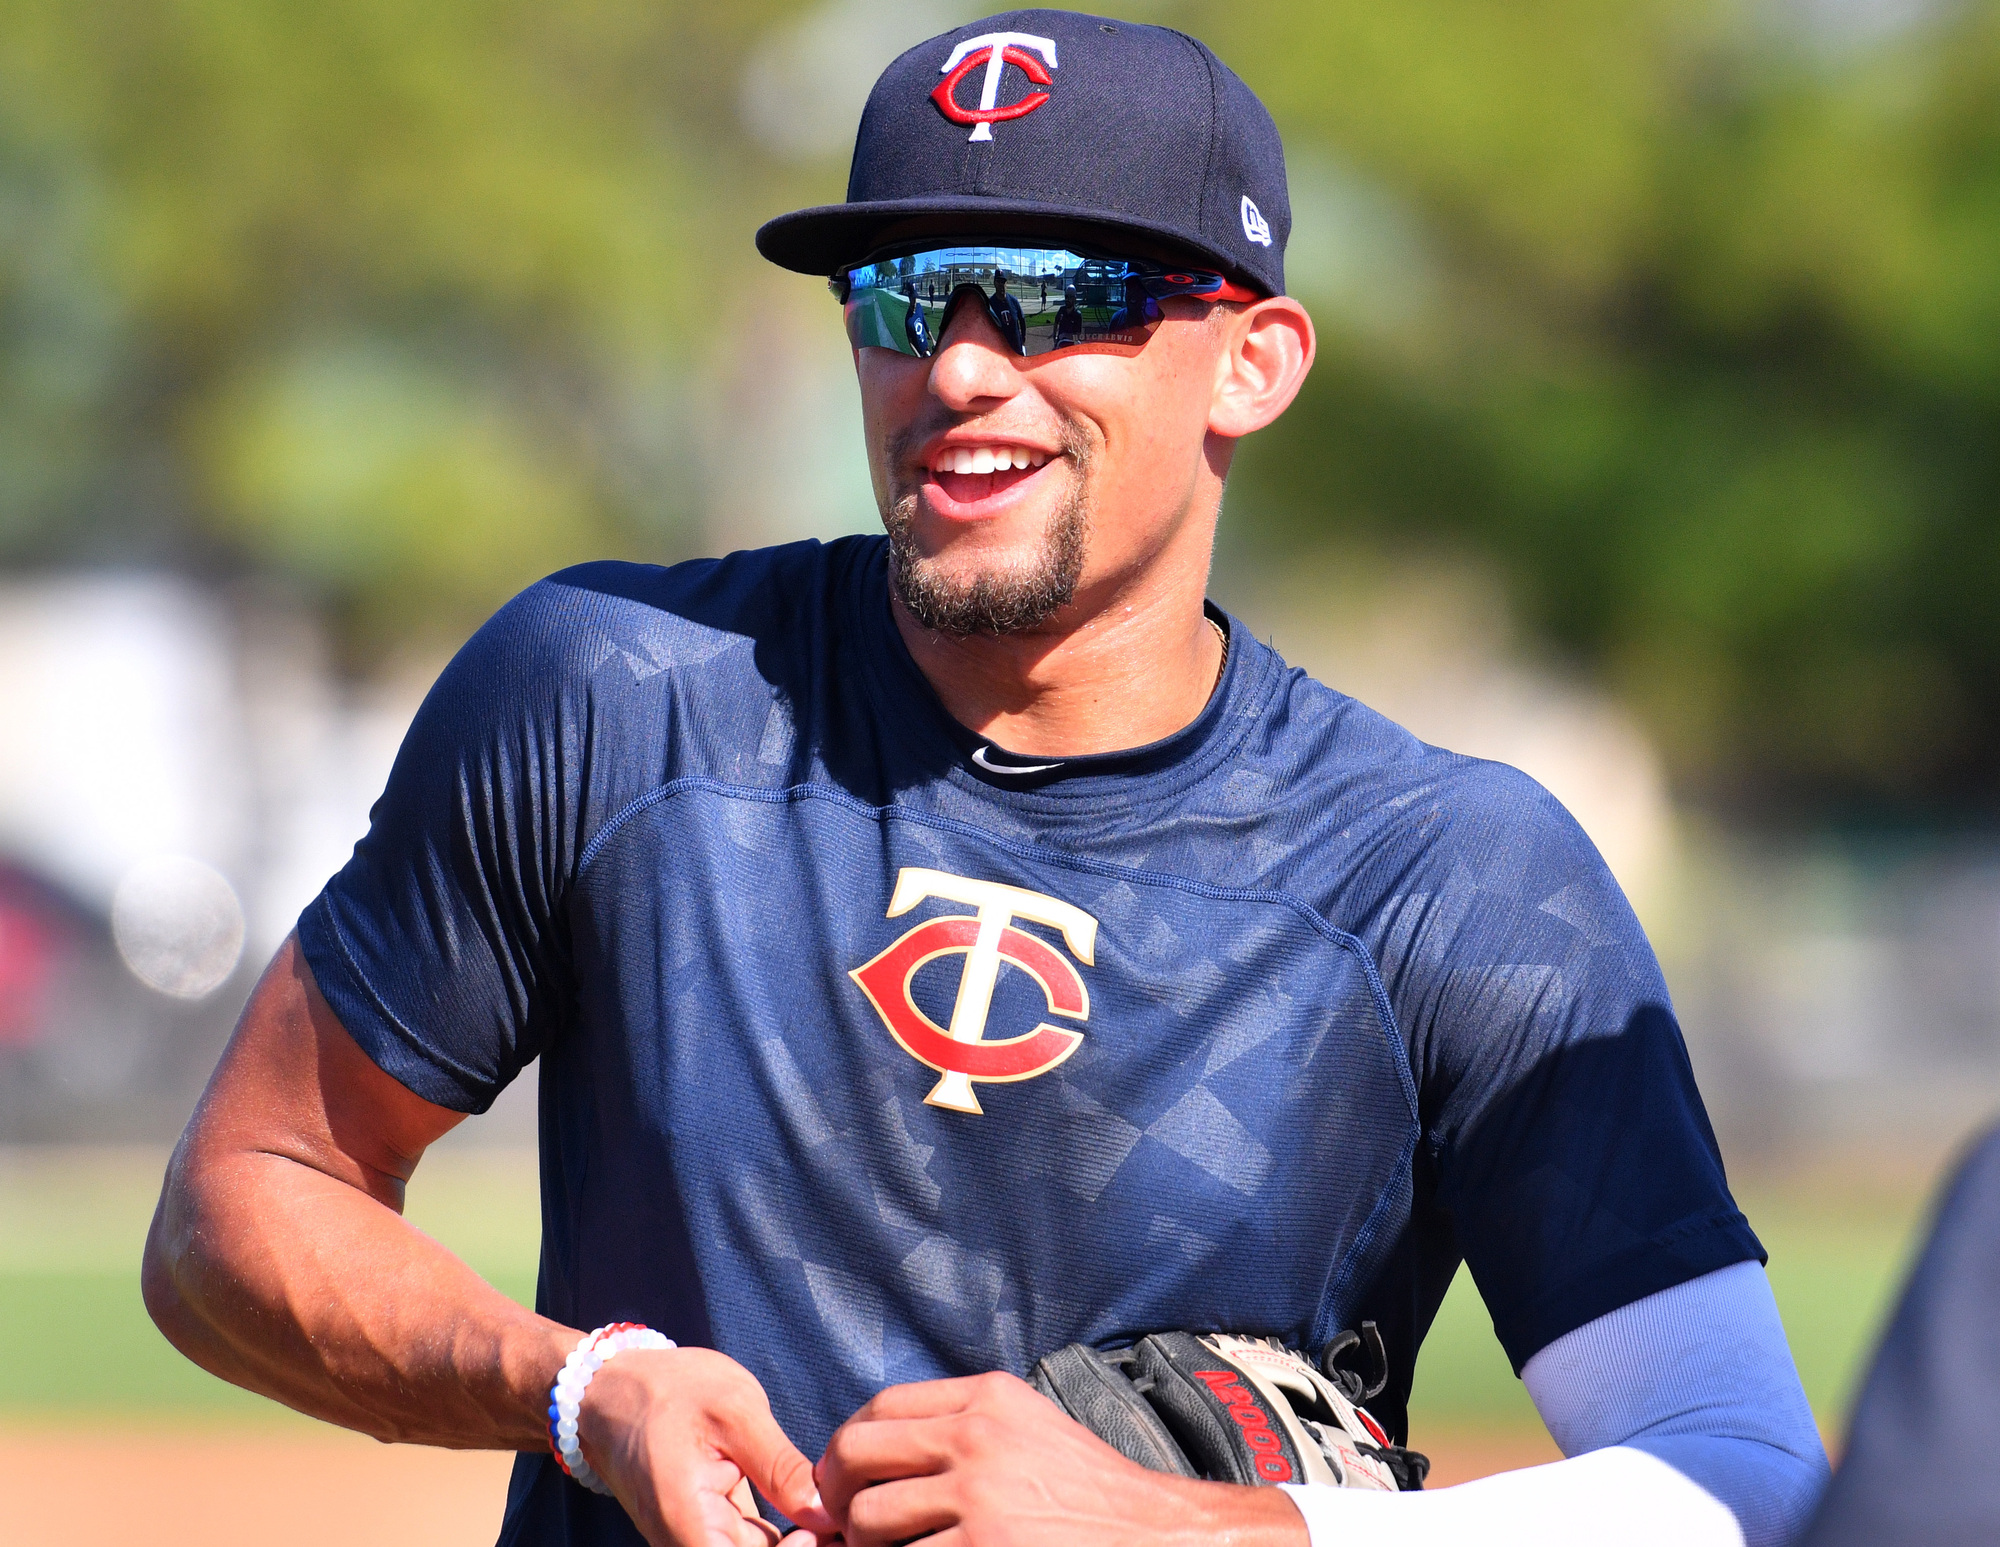 Royce Lewis, shown here in spring training this past February in Fort Myers, could be back in Twins colors and playing at Target Field before the end of next season.